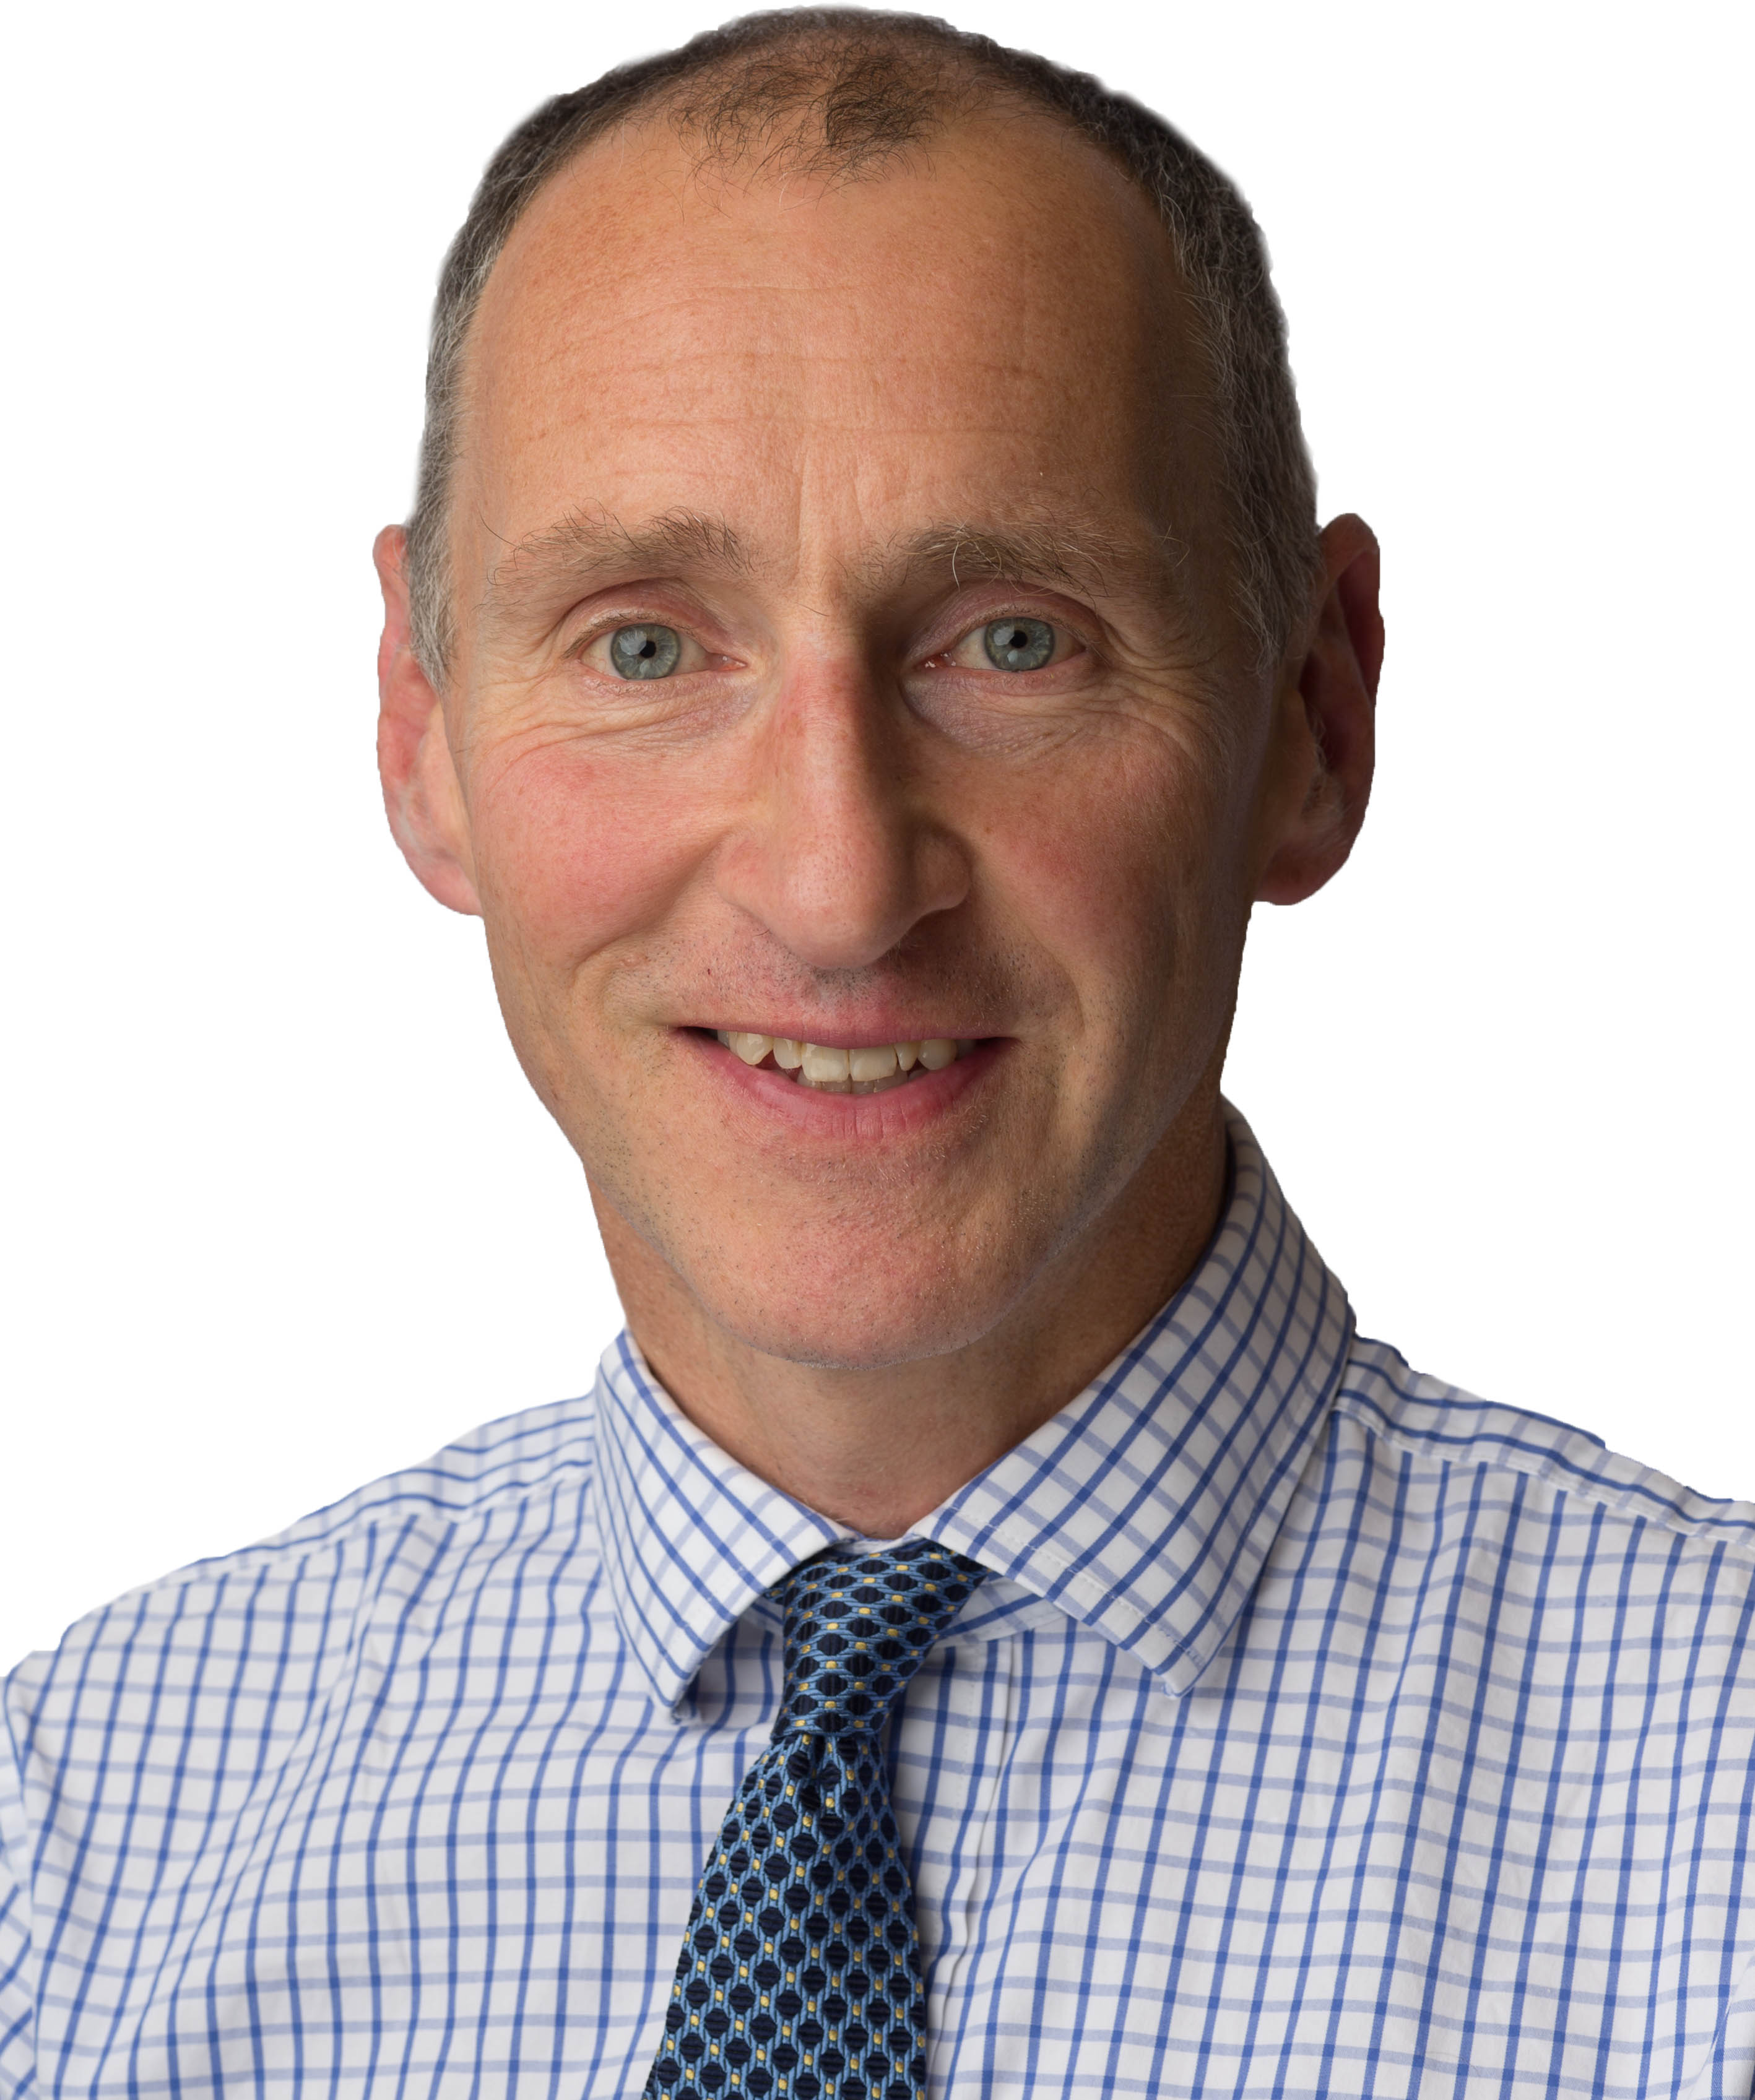 Alistair Chesser, Group Chief Medical Officer